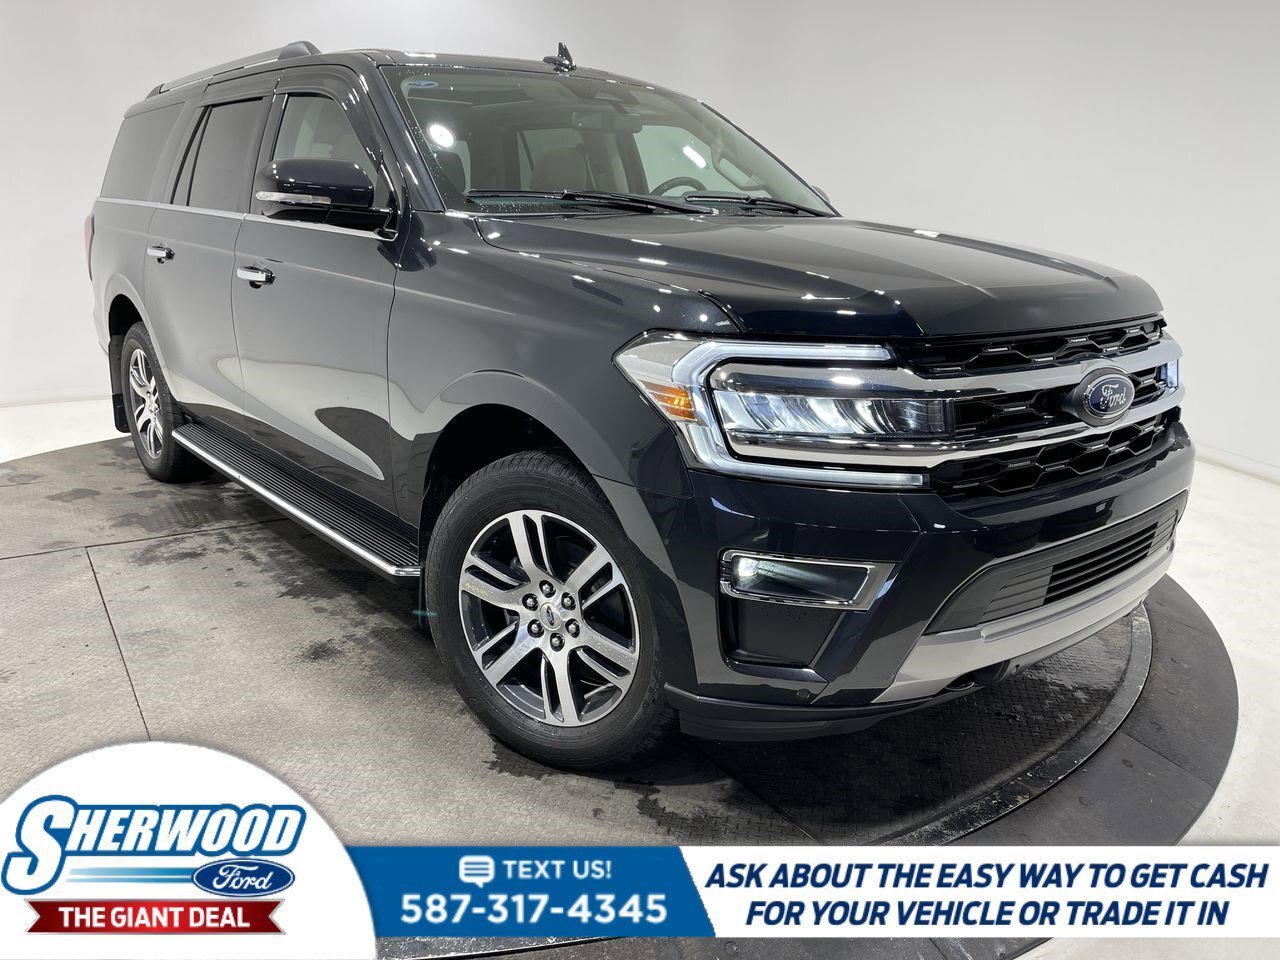 2023 Ford Expedition LTD MAX - $0 Down $331 Weekly